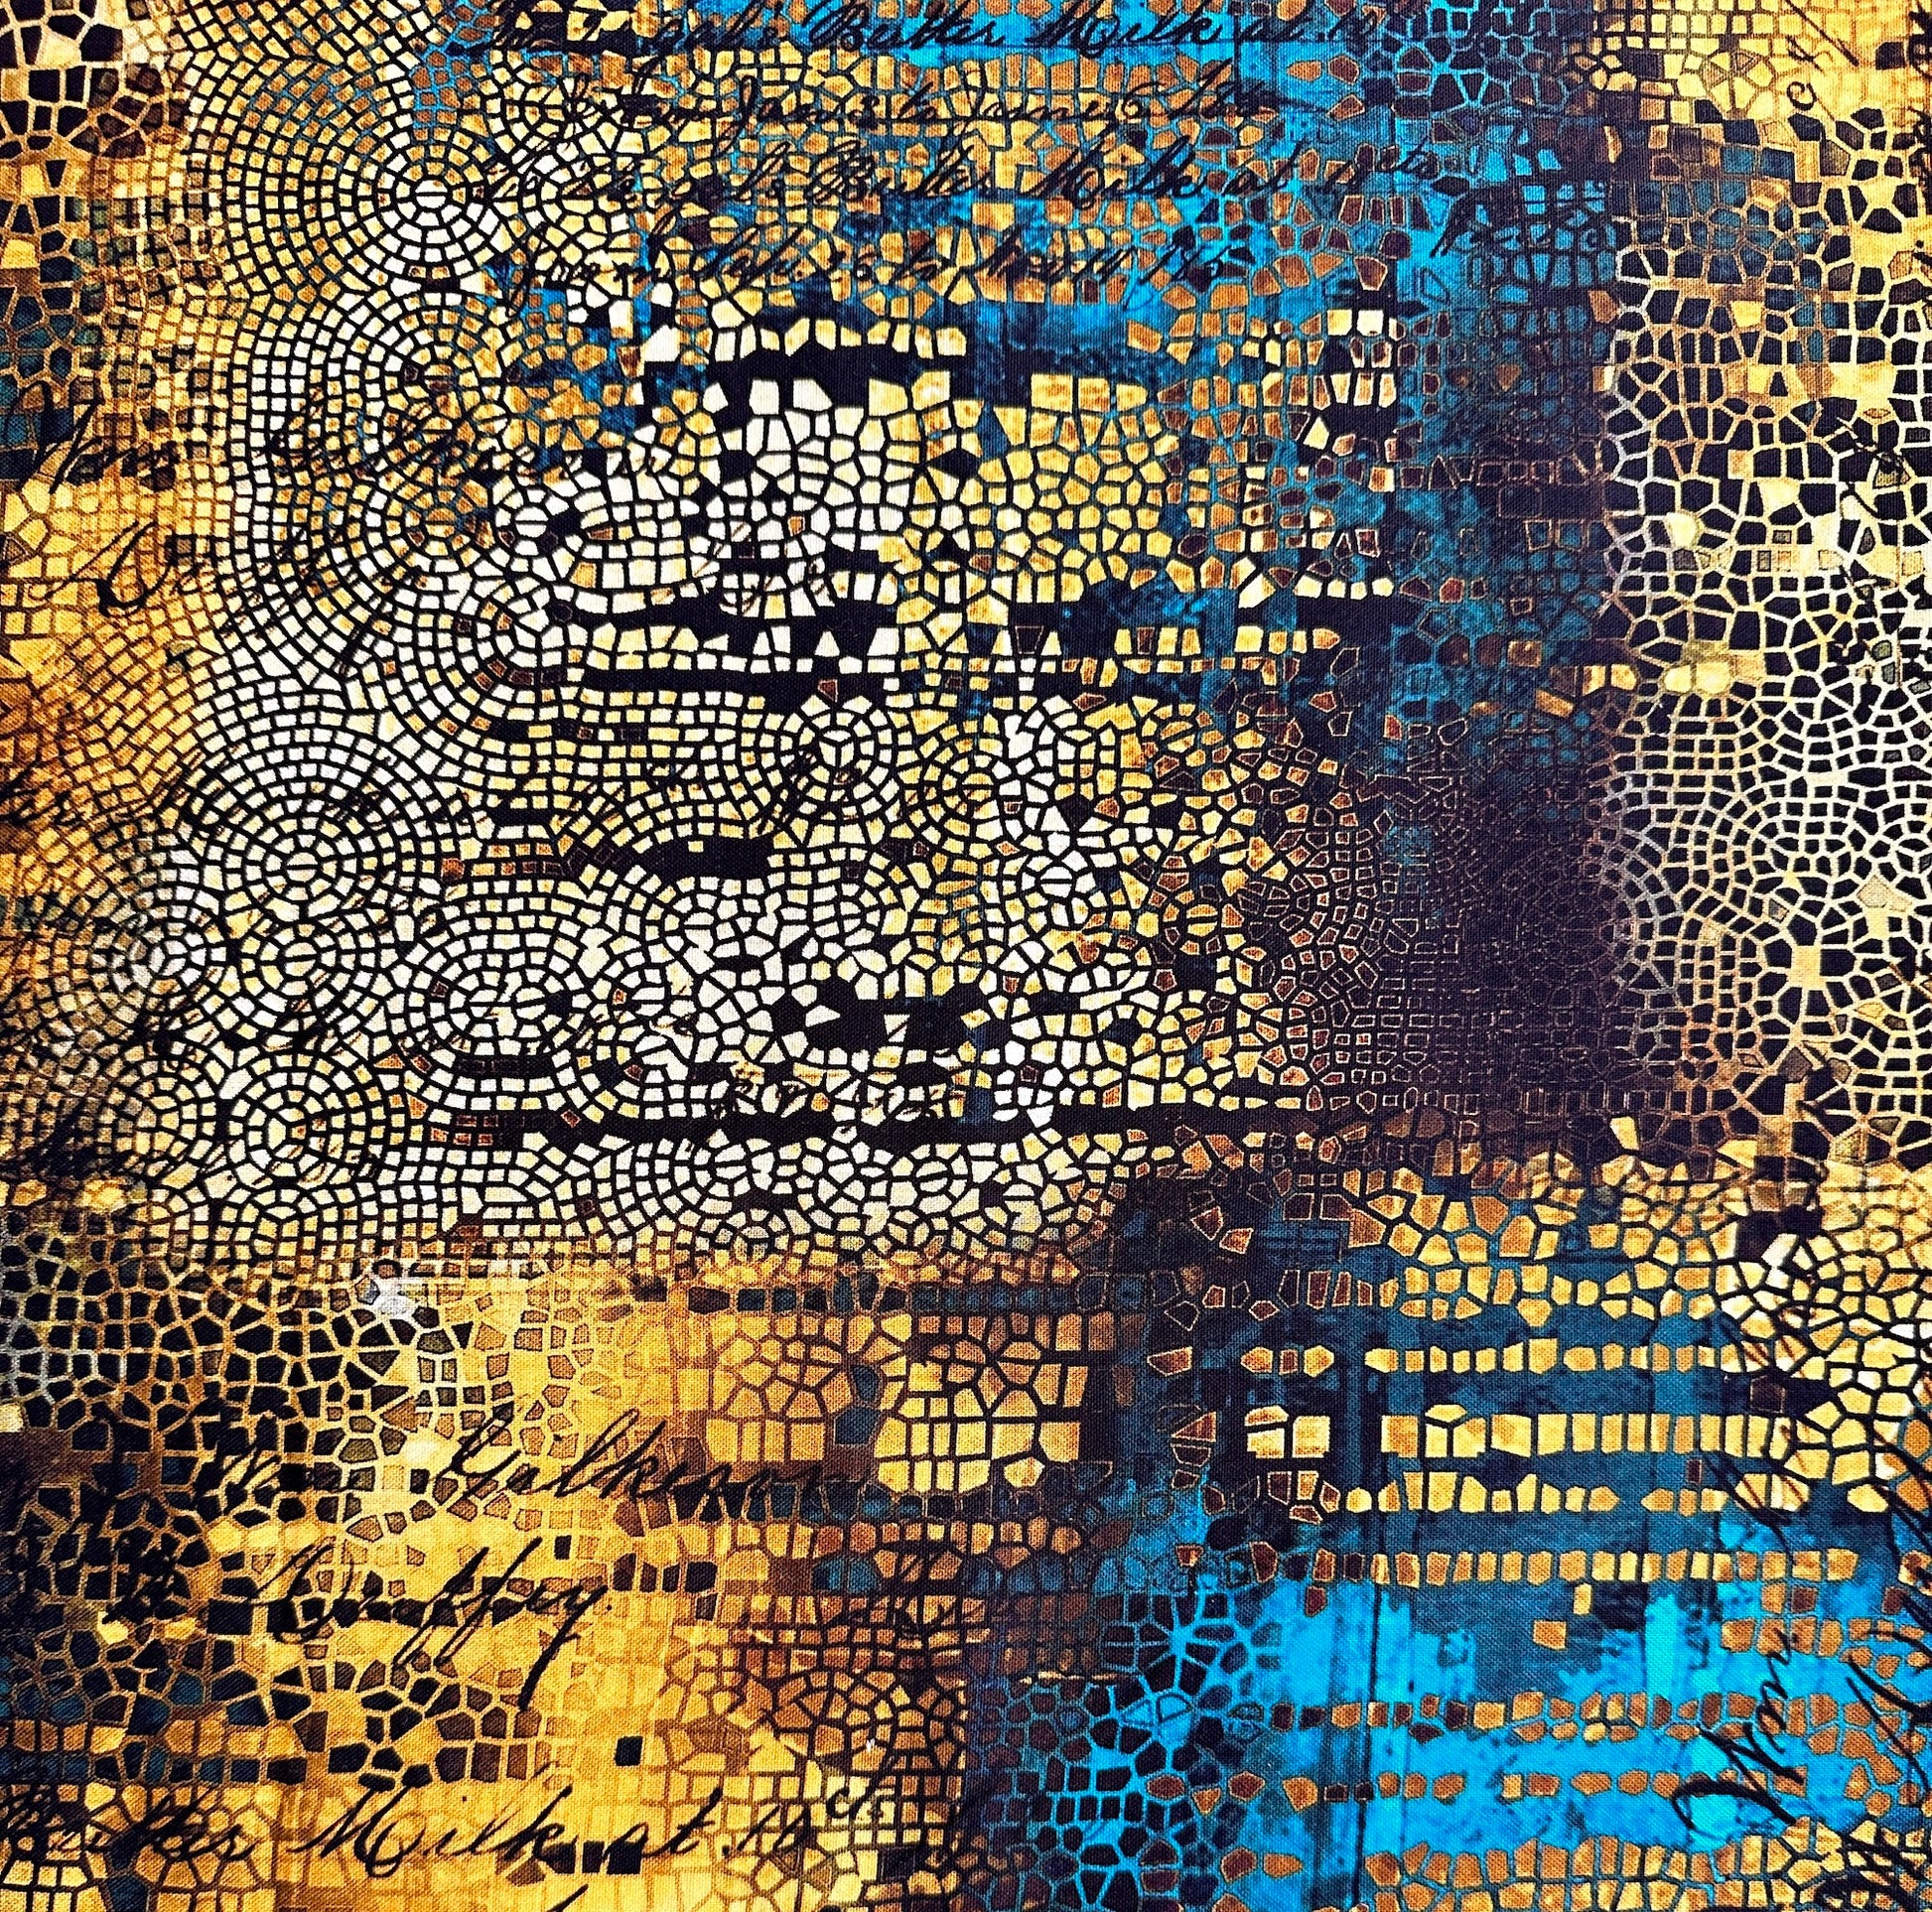 Tim Holtz Abandoned - Gilded Mosaic blues and golds with text and mosaic pattern.  For Free spirit Fabrics PWTH140 GOLD  at 2 sew textiles art quilt supplies